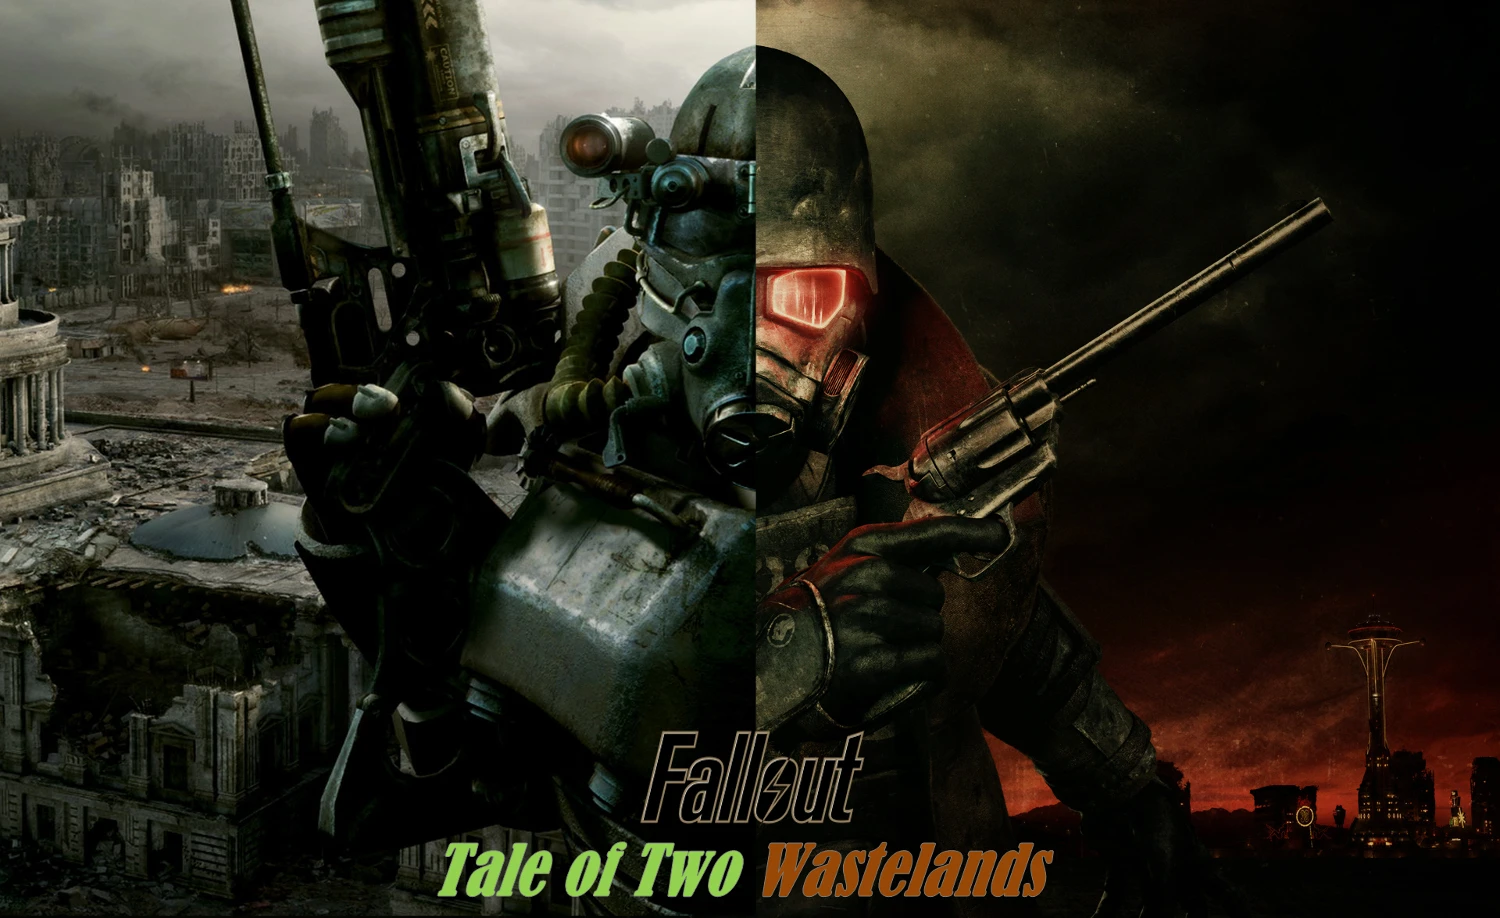 tale of two wastelands fallout new vegas download nexus